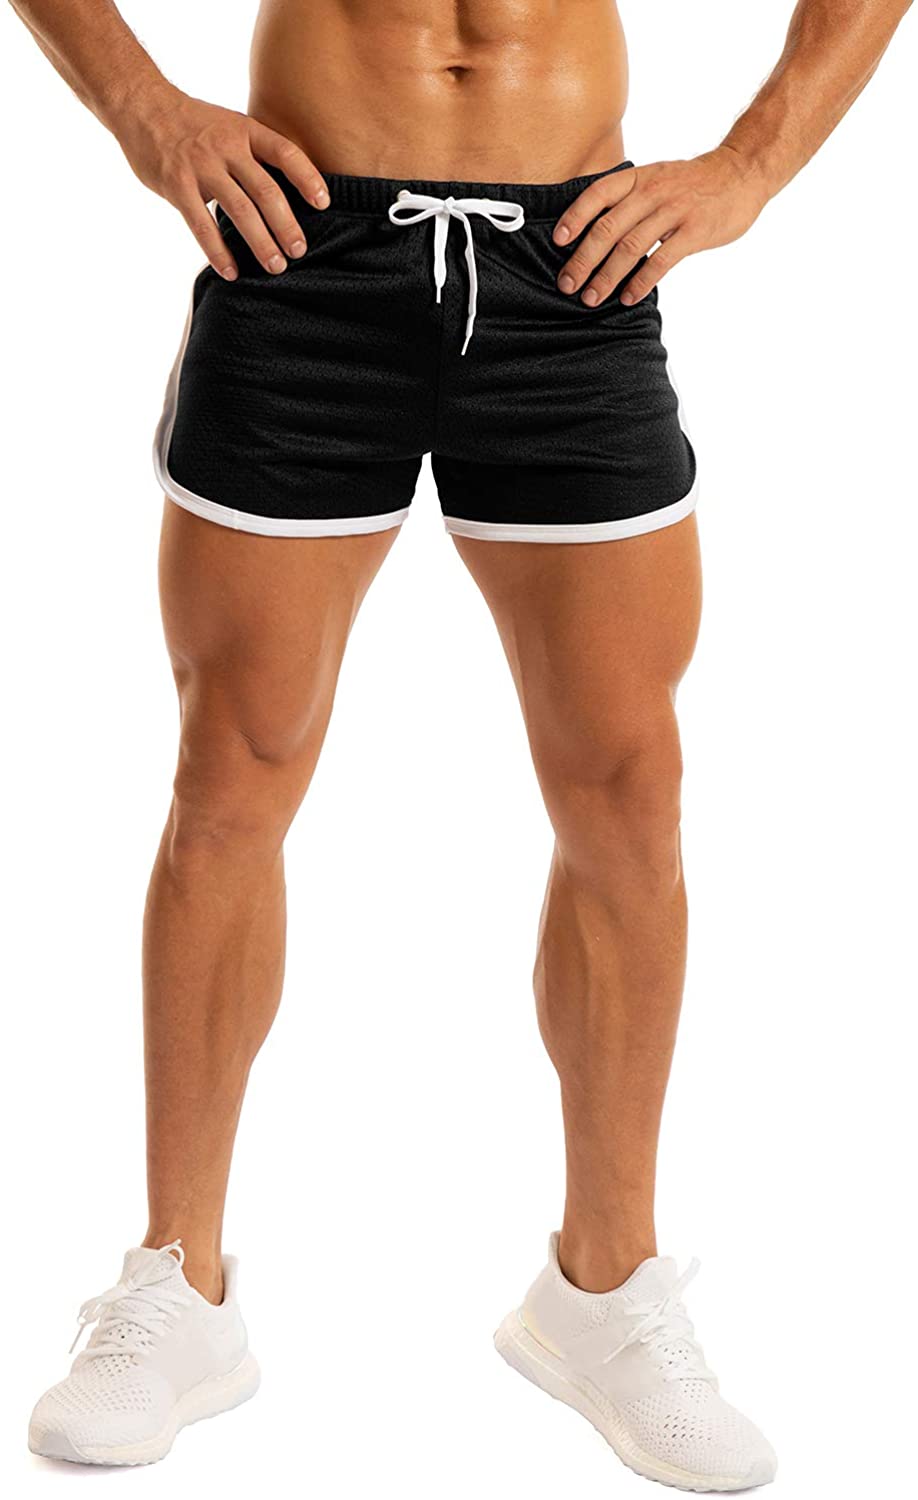 Wholesale Ouber Men's Fitted Shorts Bodybuilding Workout Gym Running Tight  Lifting Shorts Small A-black